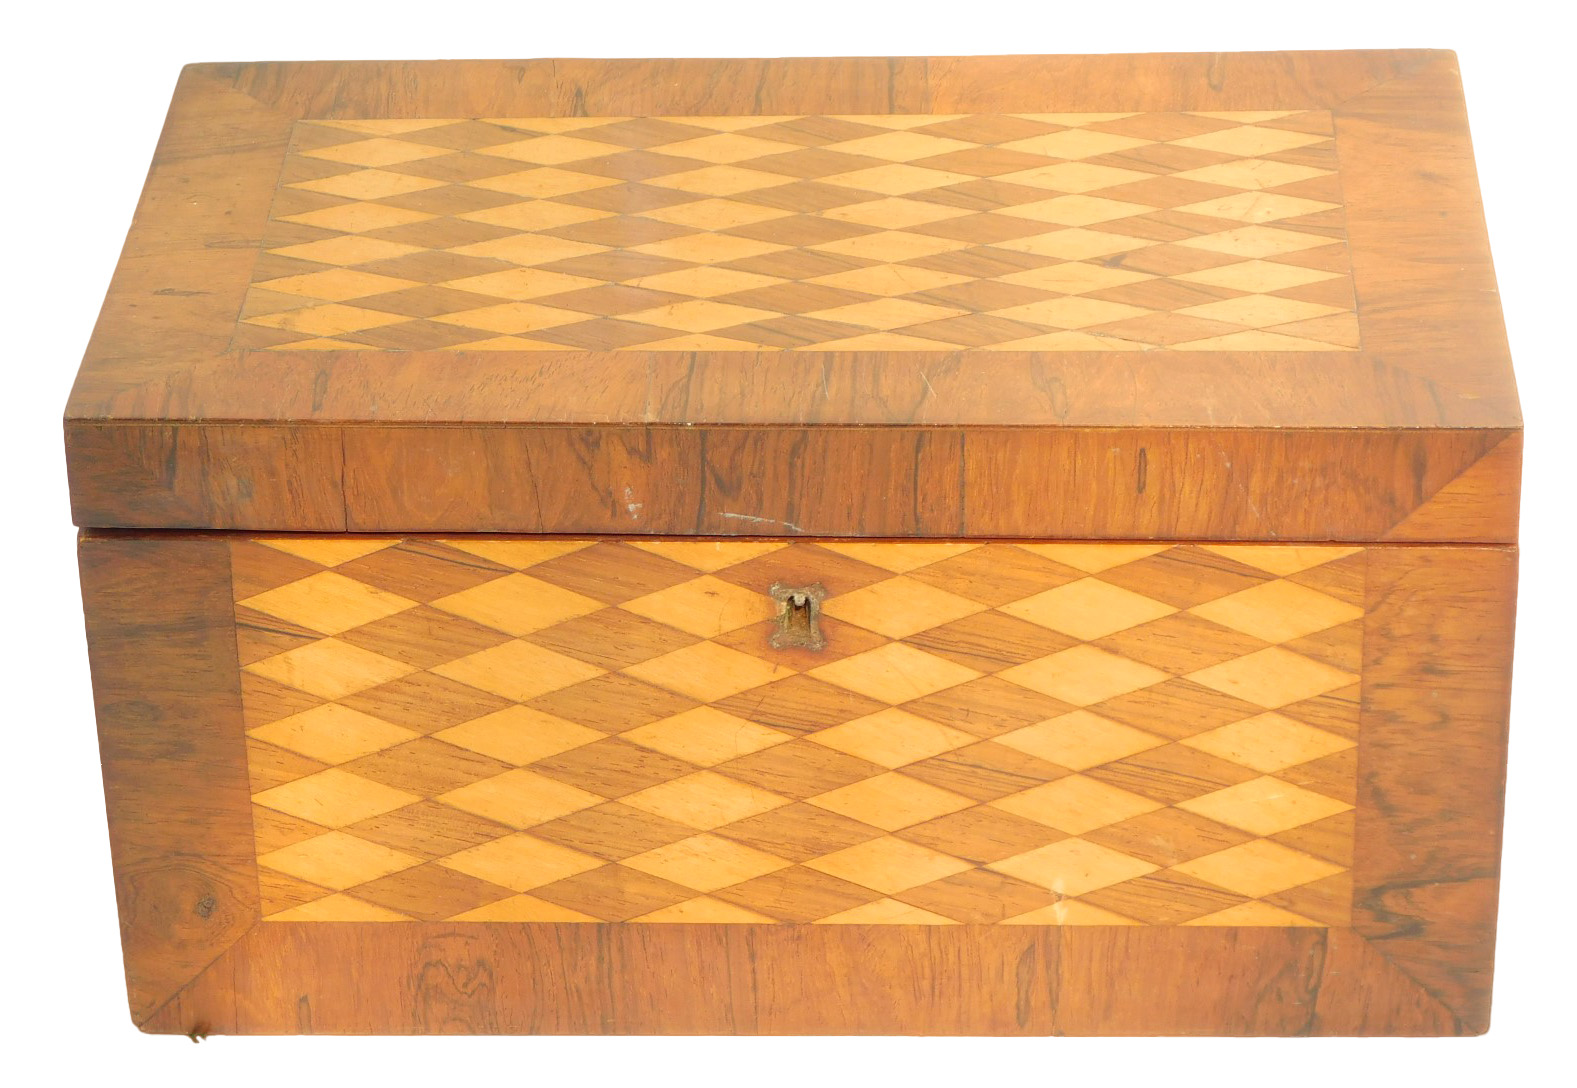 A 19thC rosewood and parquetry inlaid sewing box, the hinged lid enclosing a fitted interior, with v